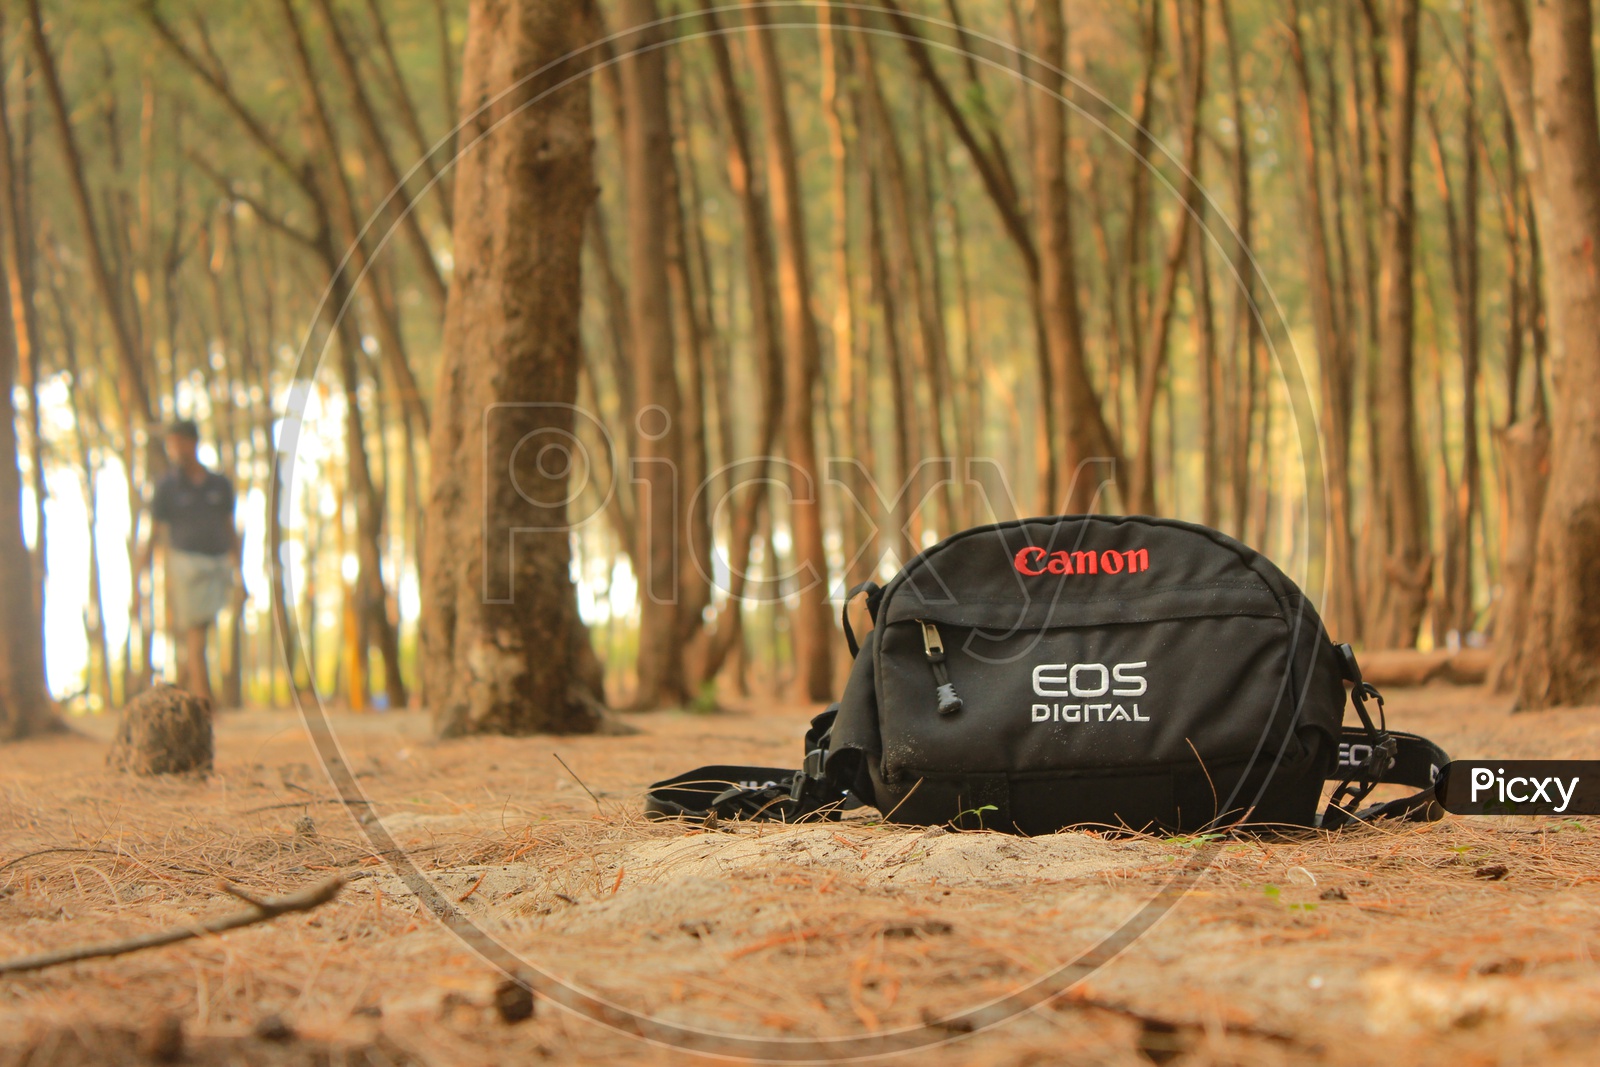 Canon EOS bag placed on ground with trees in the background